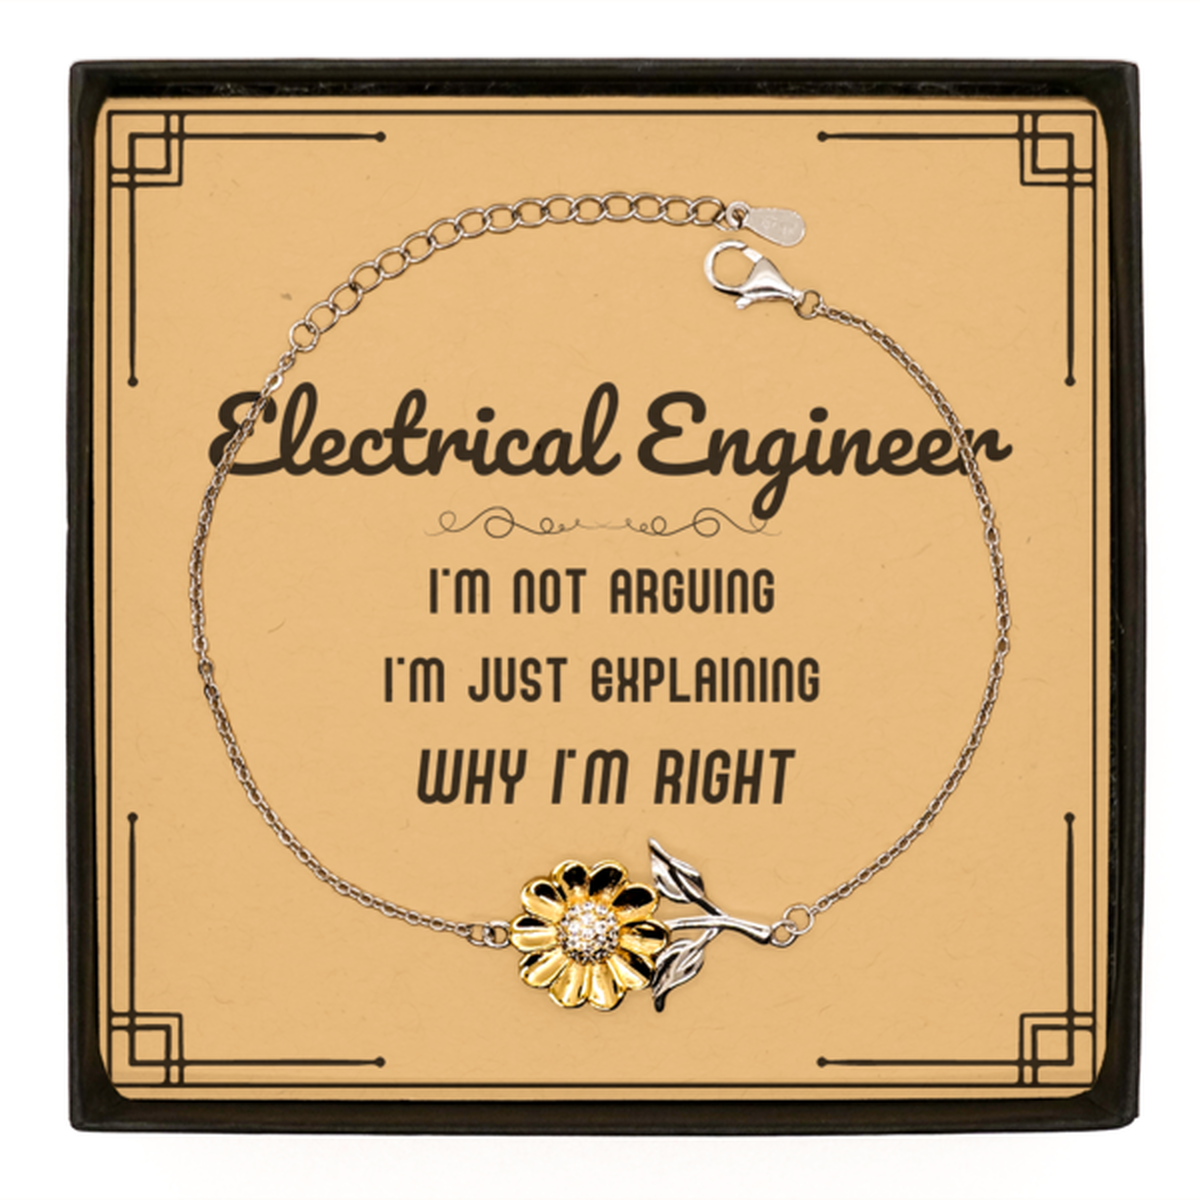 Electrical Engineer I'm not Arguing. I'm Just Explaining Why I'm RIGHT Sunflower Bracelet, Funny Saying Quote Electrical Engineer Gifts For Electrical Engineer Message Card Graduation Birthday Christmas Gifts for Men Women Coworker